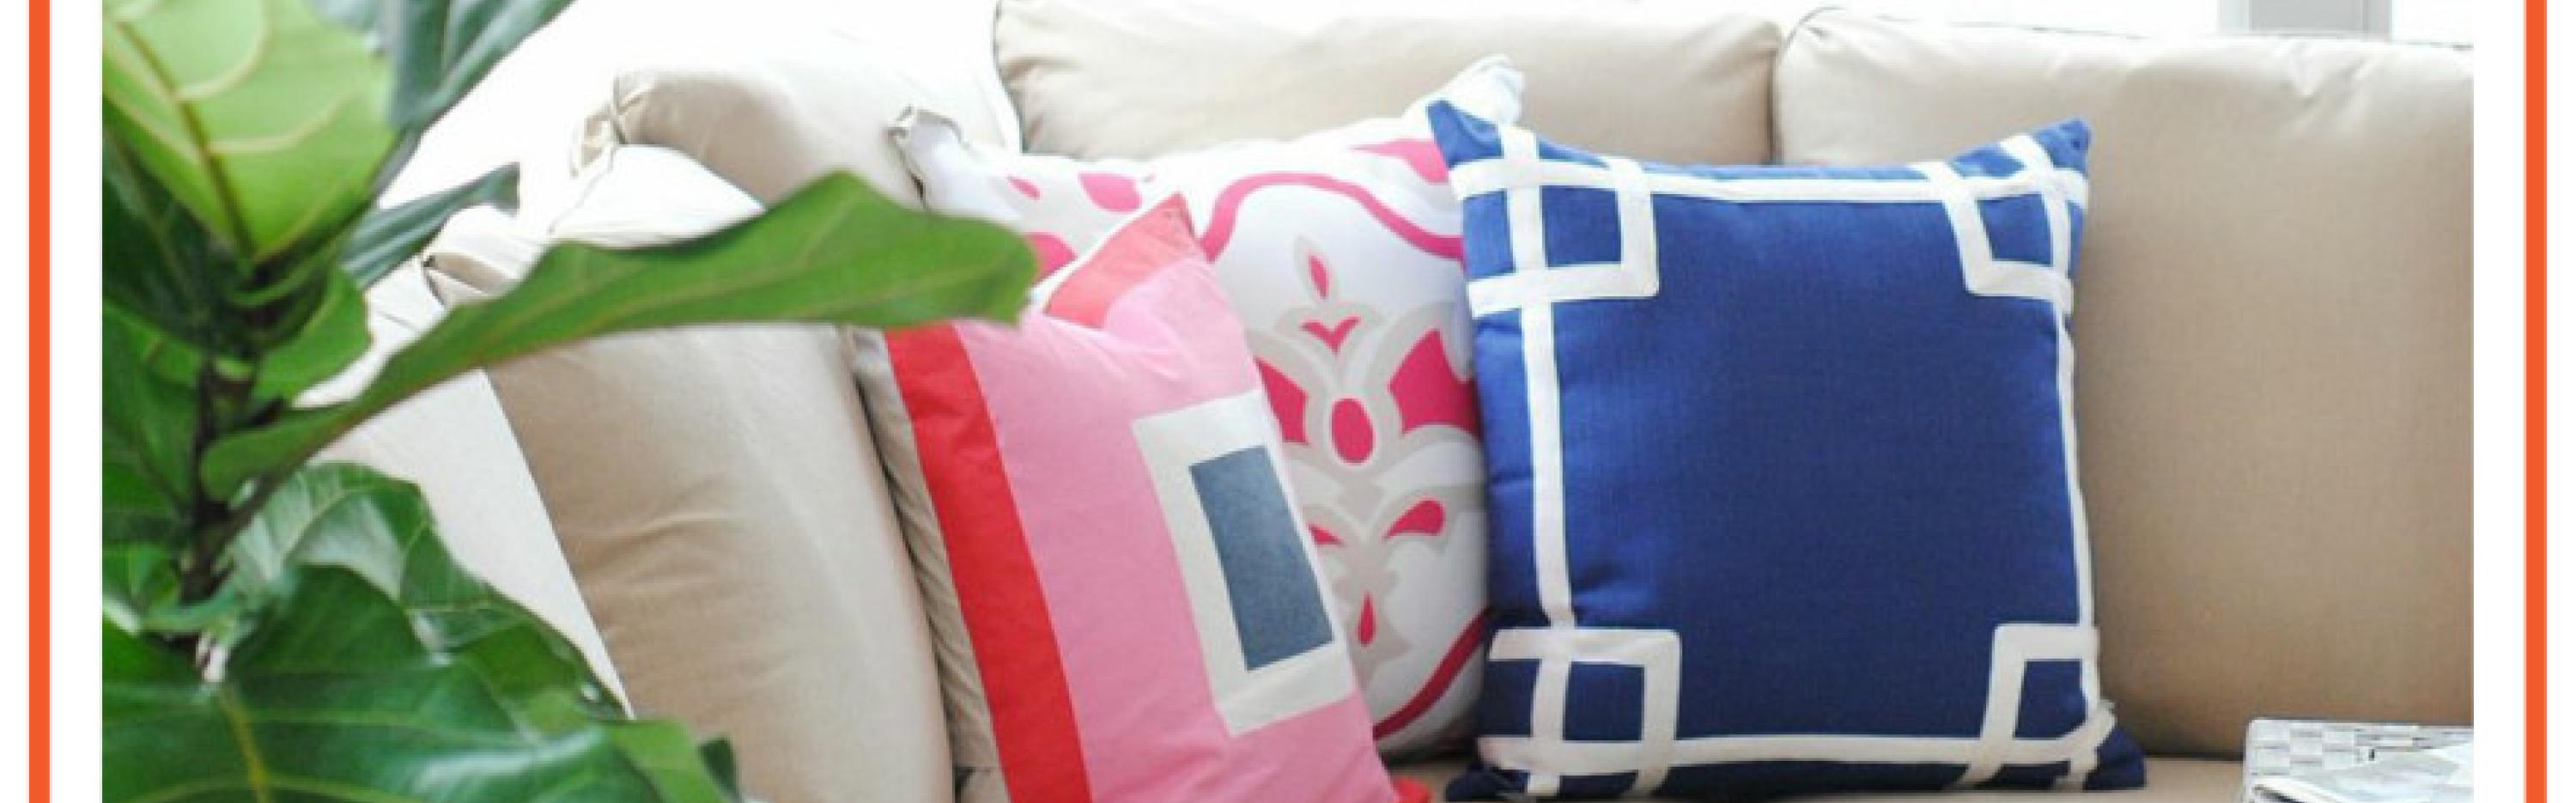 Bright throw pillows on neutral couch